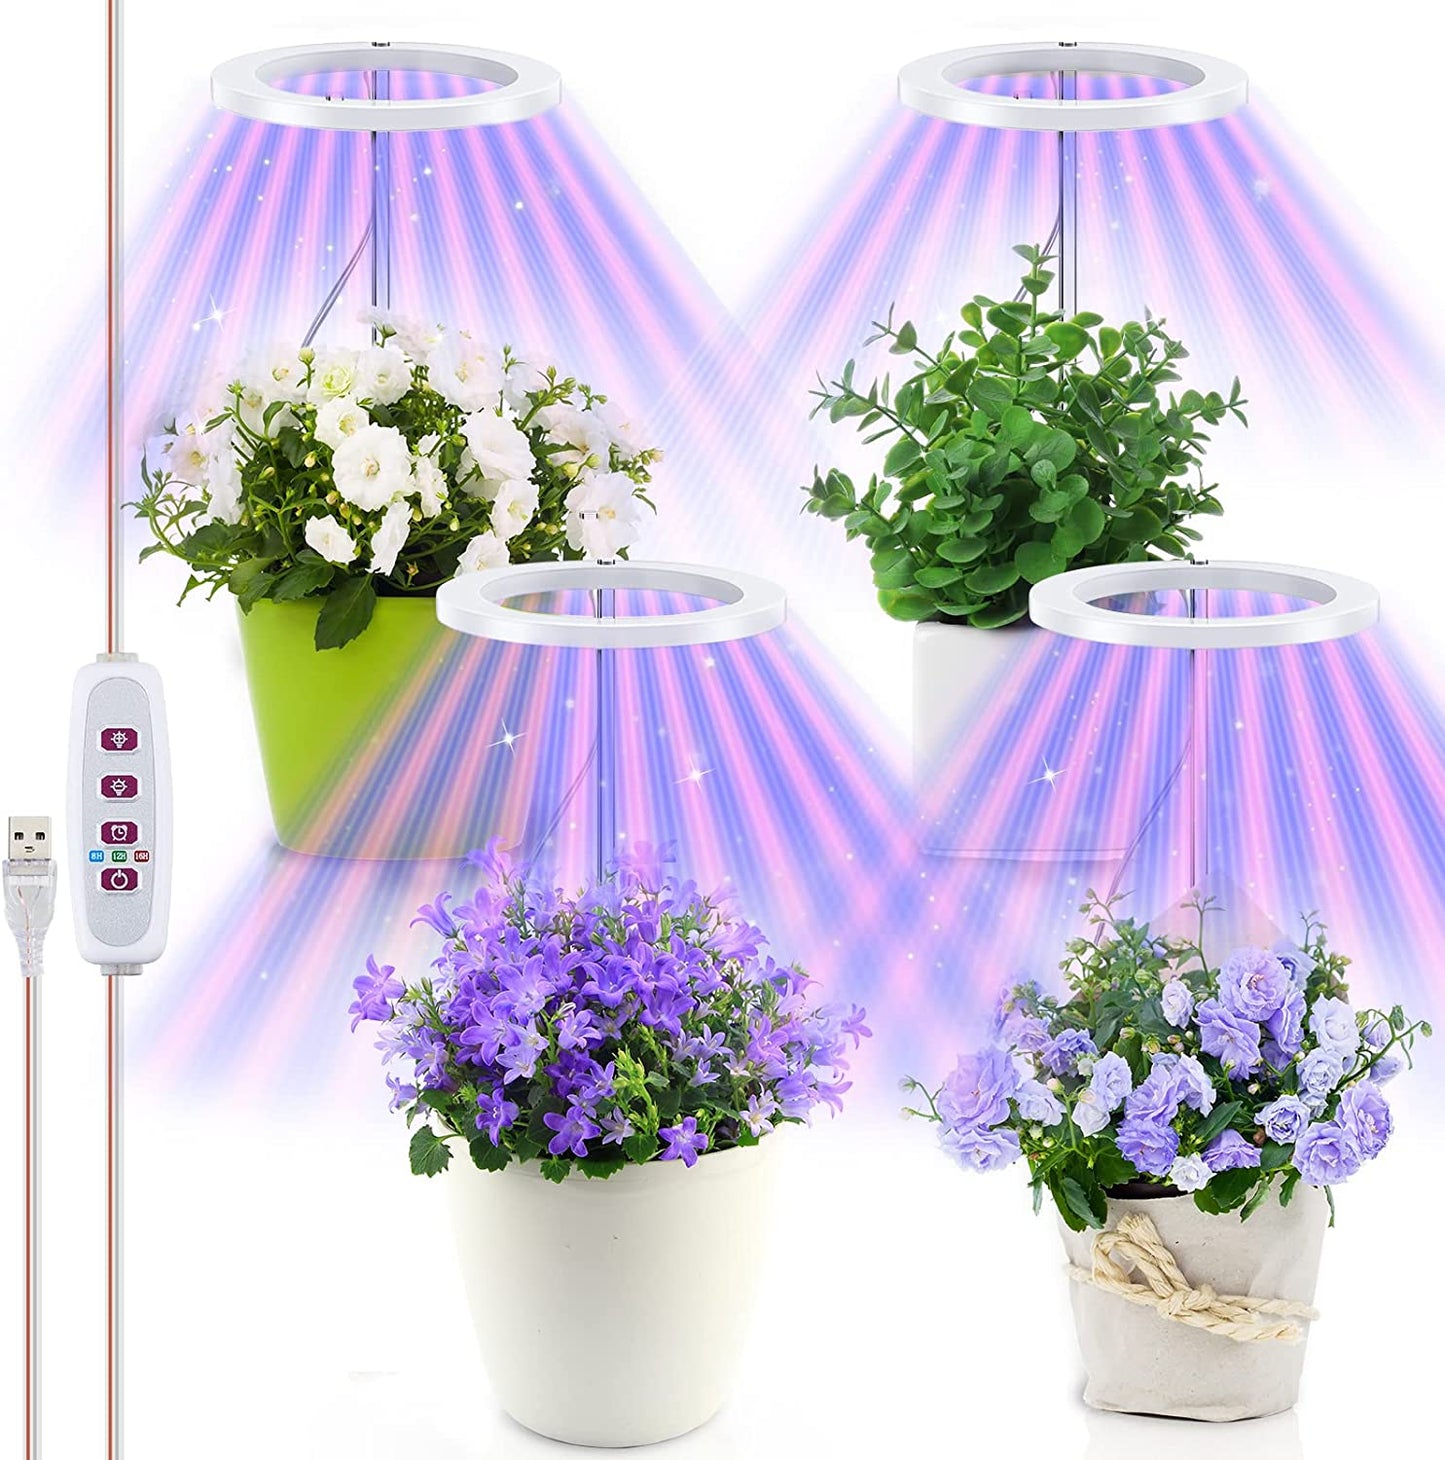 LED Grow Light for Indoor Plants 4 Heads Height Adjustable Plant Growing Lamp Plant Auto Timing Switch Annular Light, Idea for Small Plant Light Home Decoration